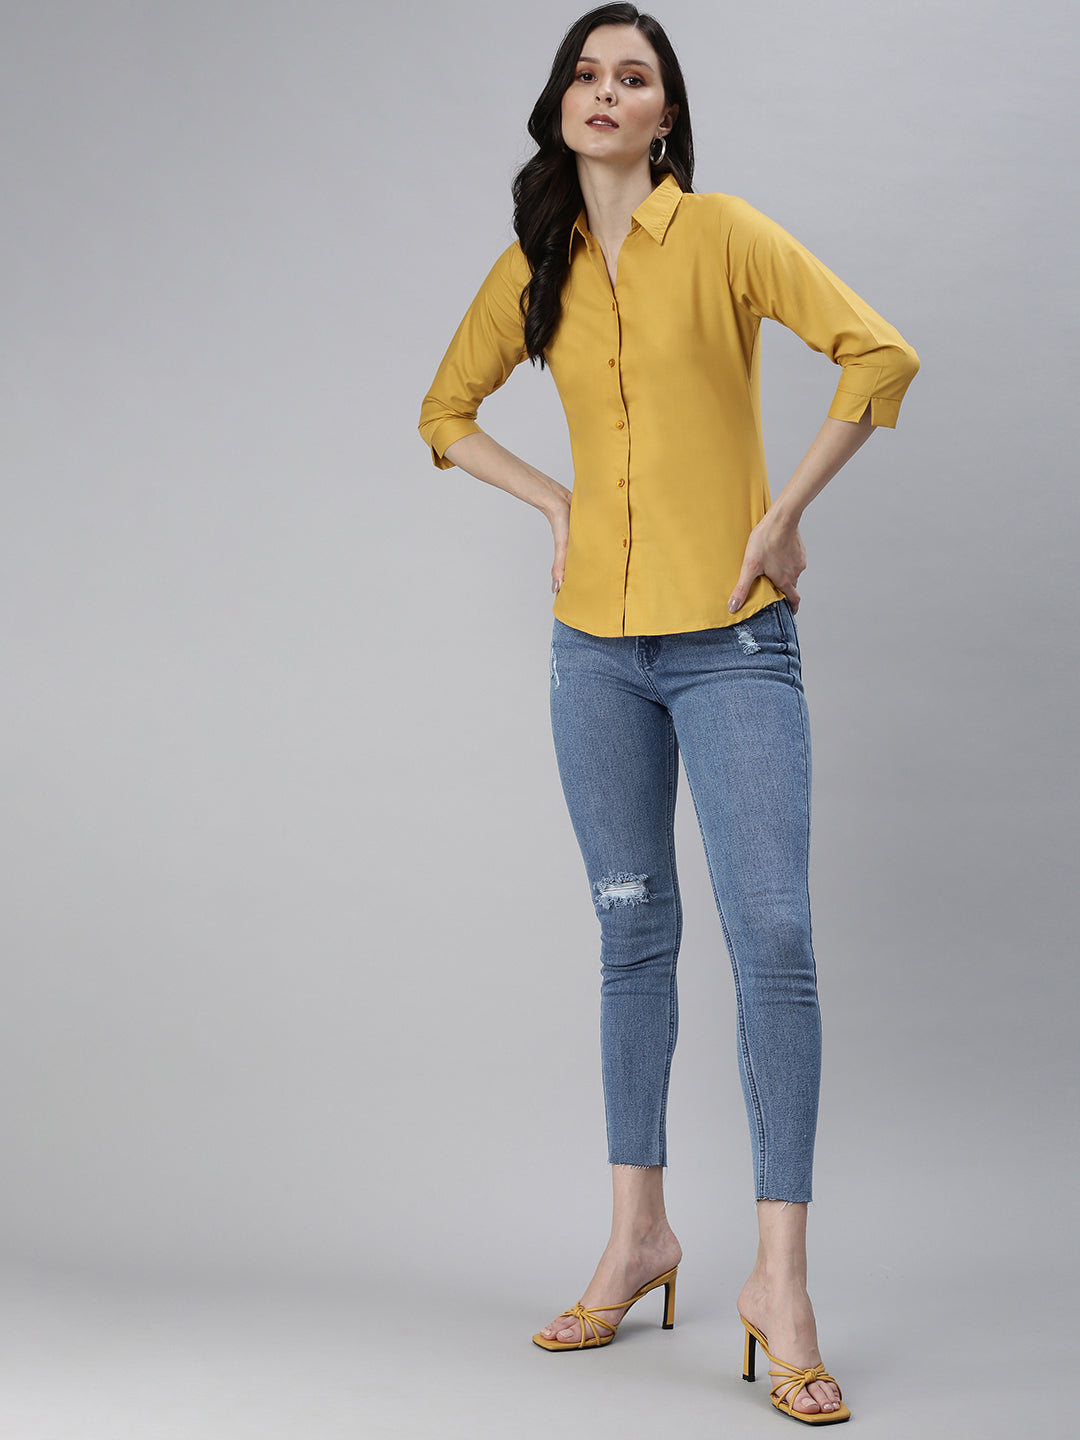 Women's Mustard Solid Casual Shirts